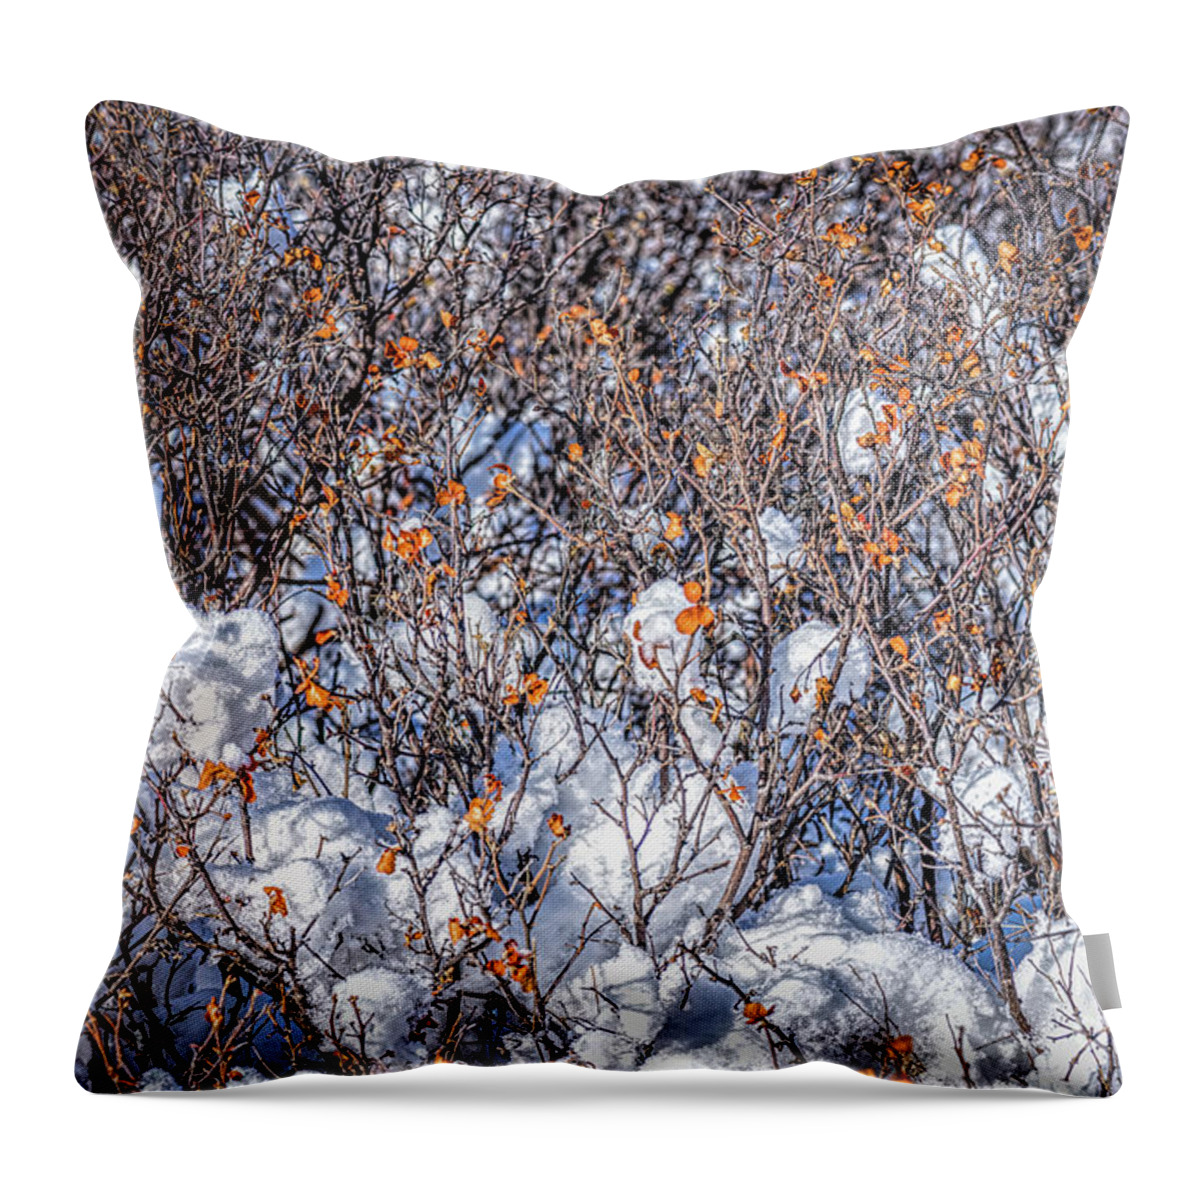 Jon Burch Throw Pillow featuring the photograph Orange Leaves In The Snow by Jon Burch Photography